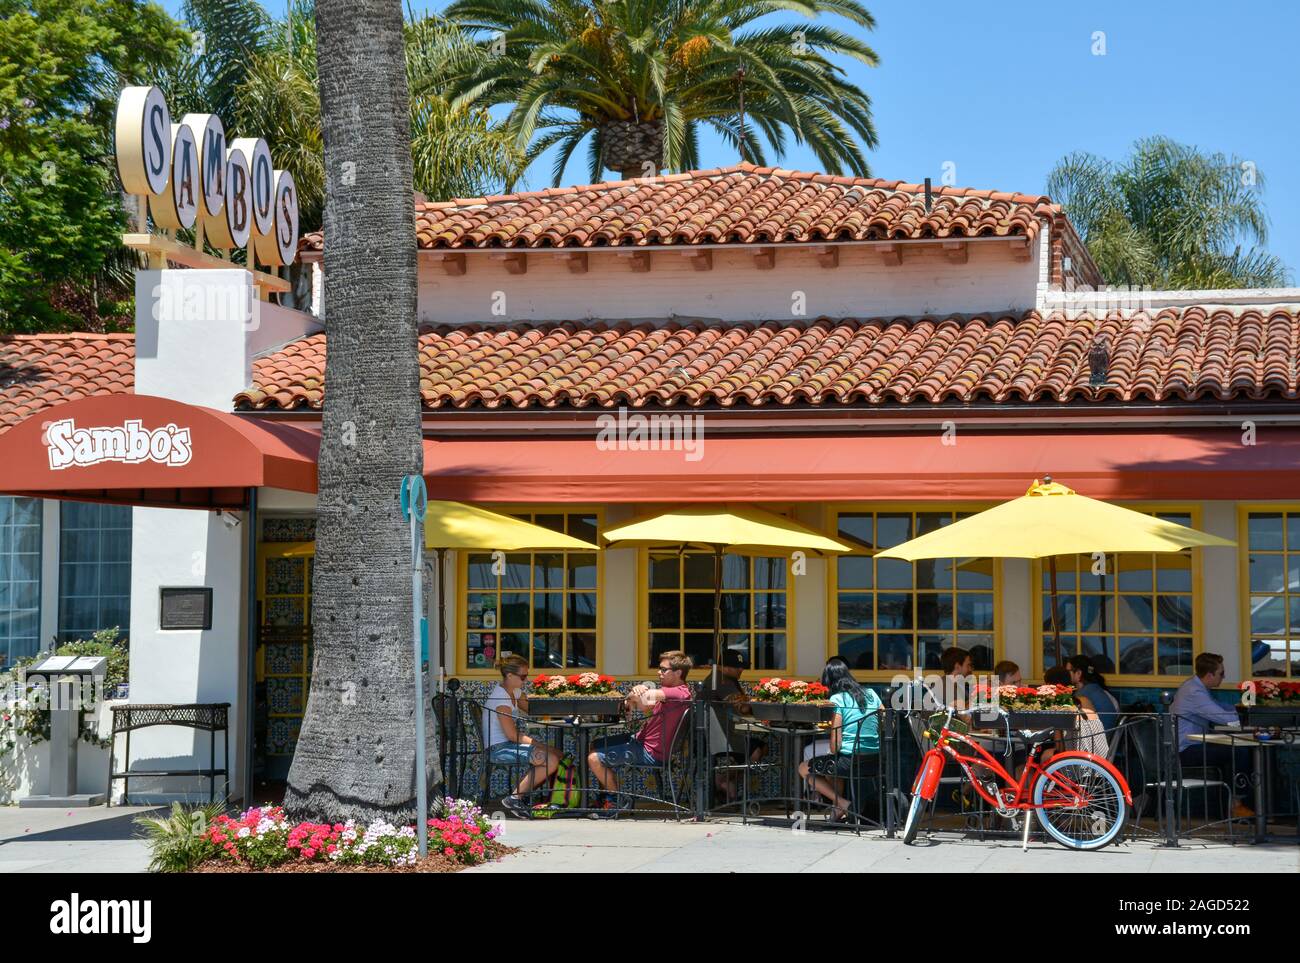 People dining on patio at Sambos restaurant, the last of the Sambos chain restaurants to remain in business, located in Santa Barbara, CA, USA Stock Photo